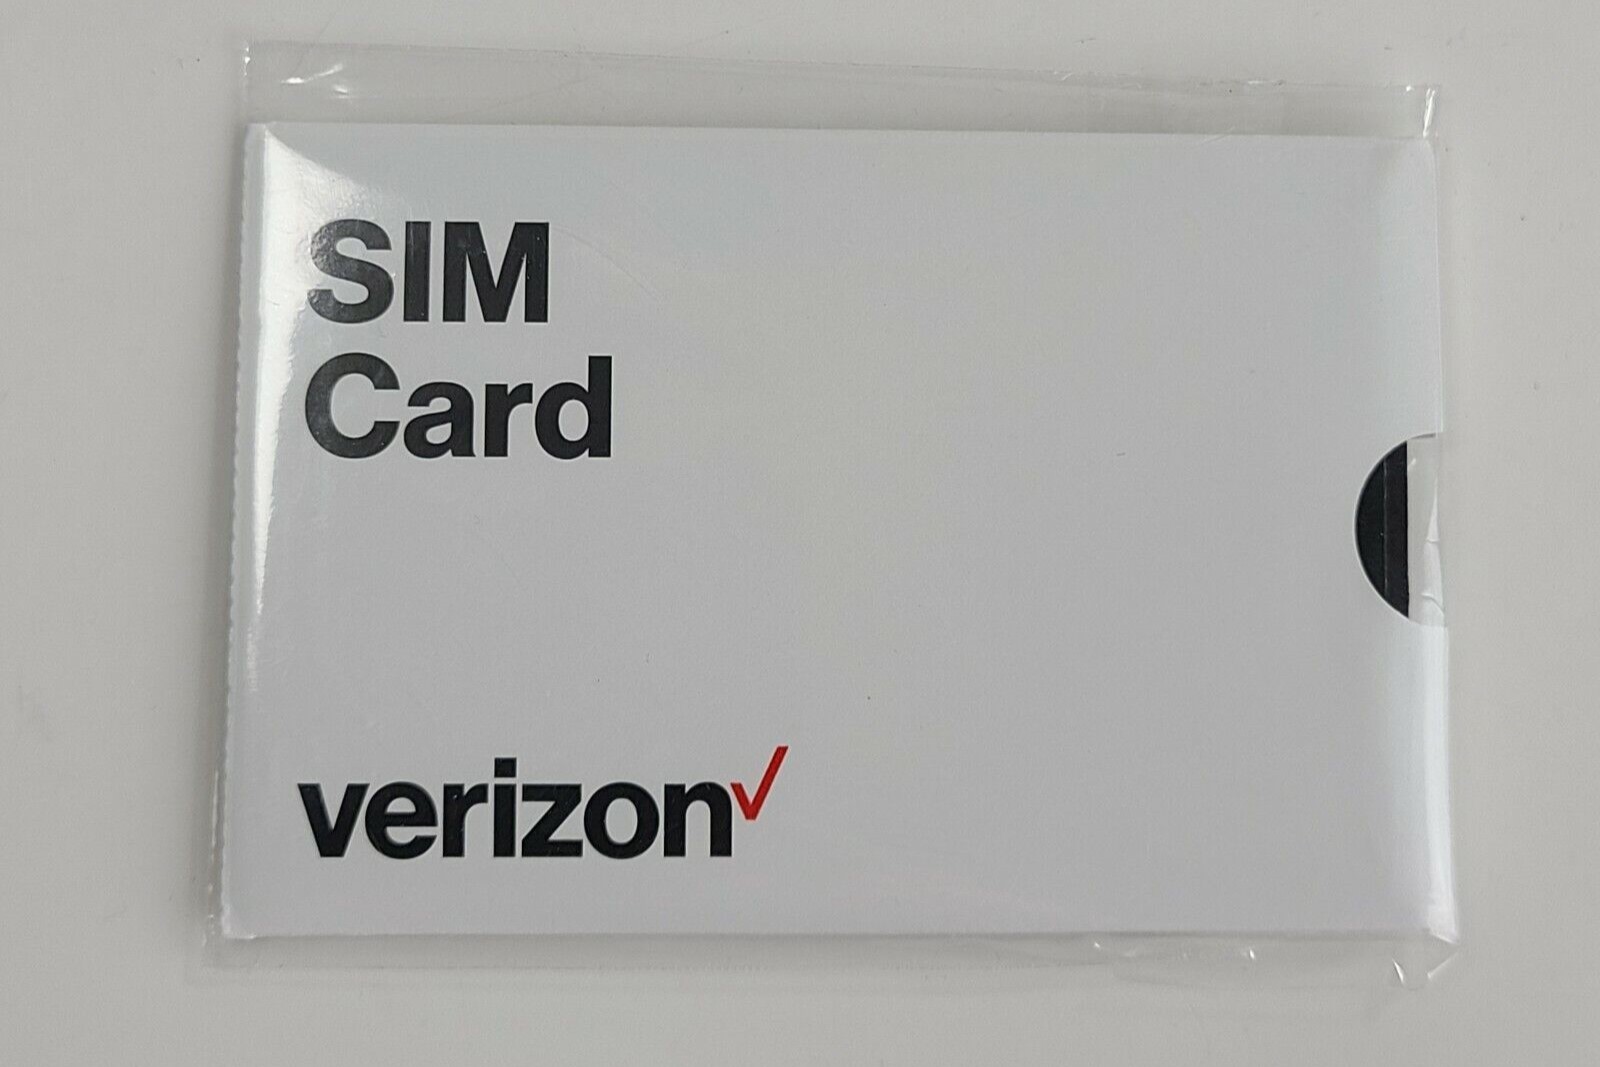 activating-your-verizon-sim-card-easy-steps-to-follow